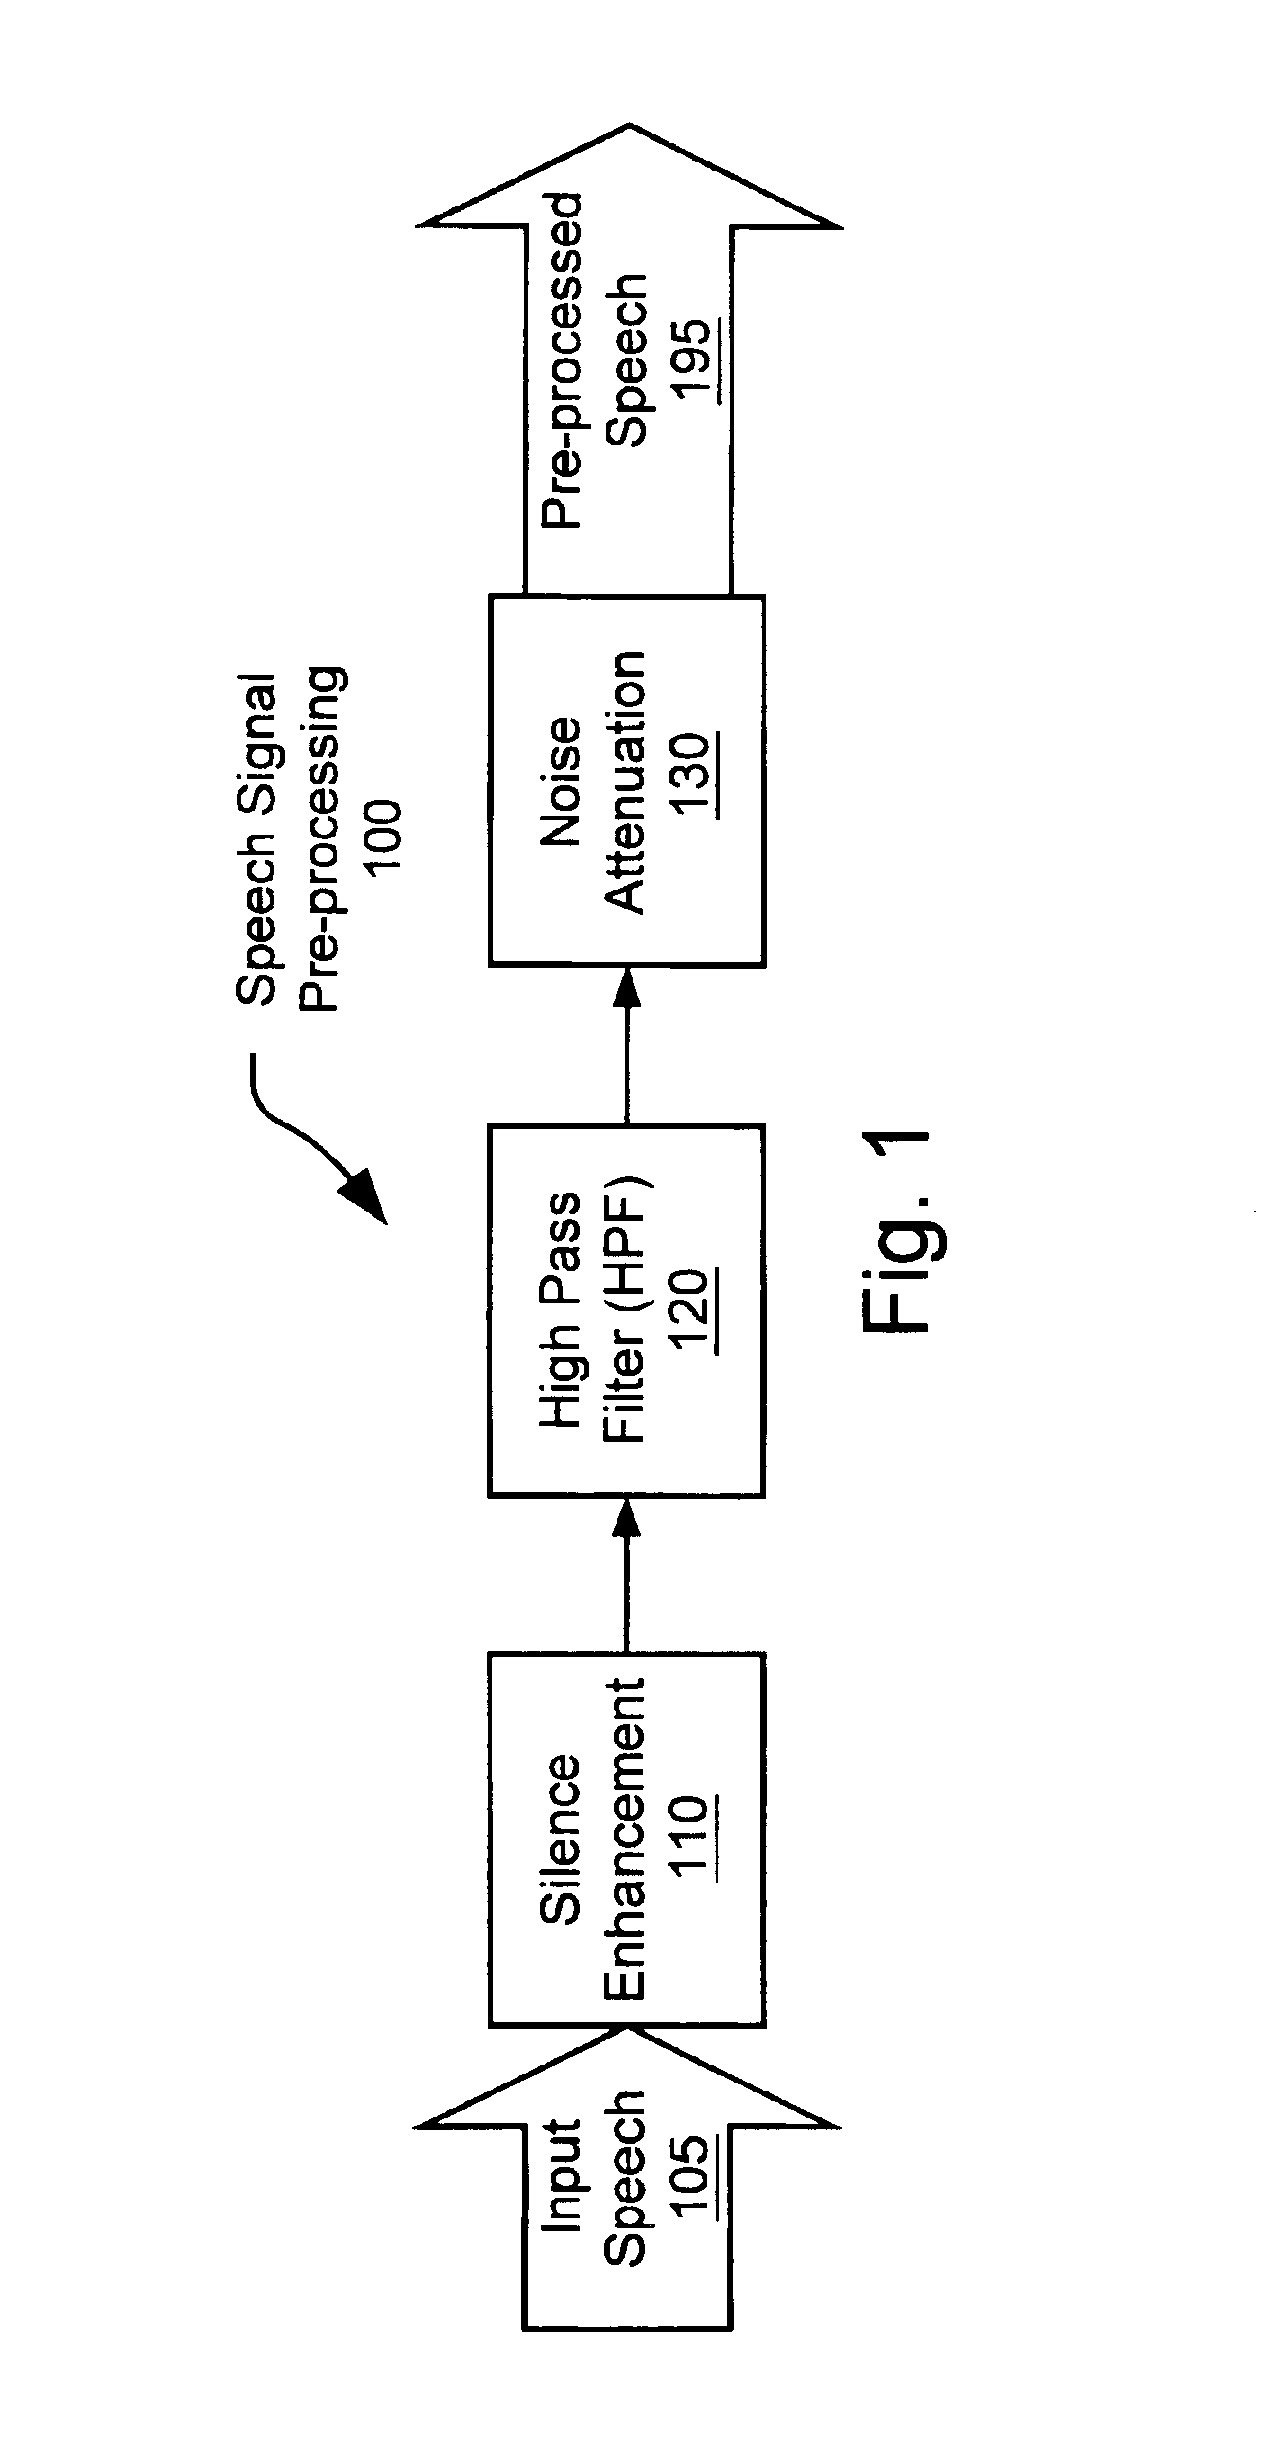 Fixed rate speech compression system and method